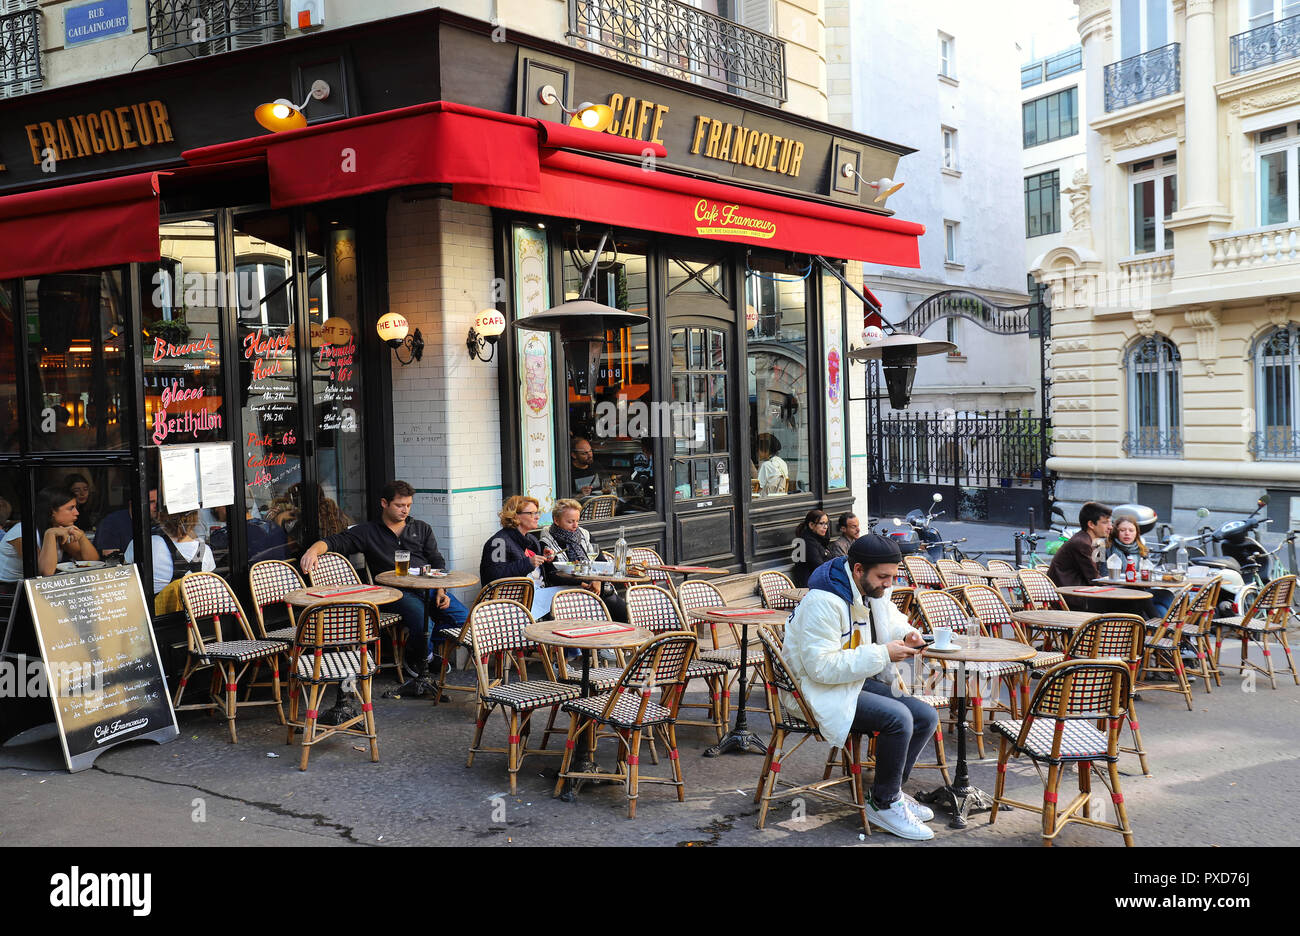 The French traditional cafe Francoeur located in Montmartre area in ...